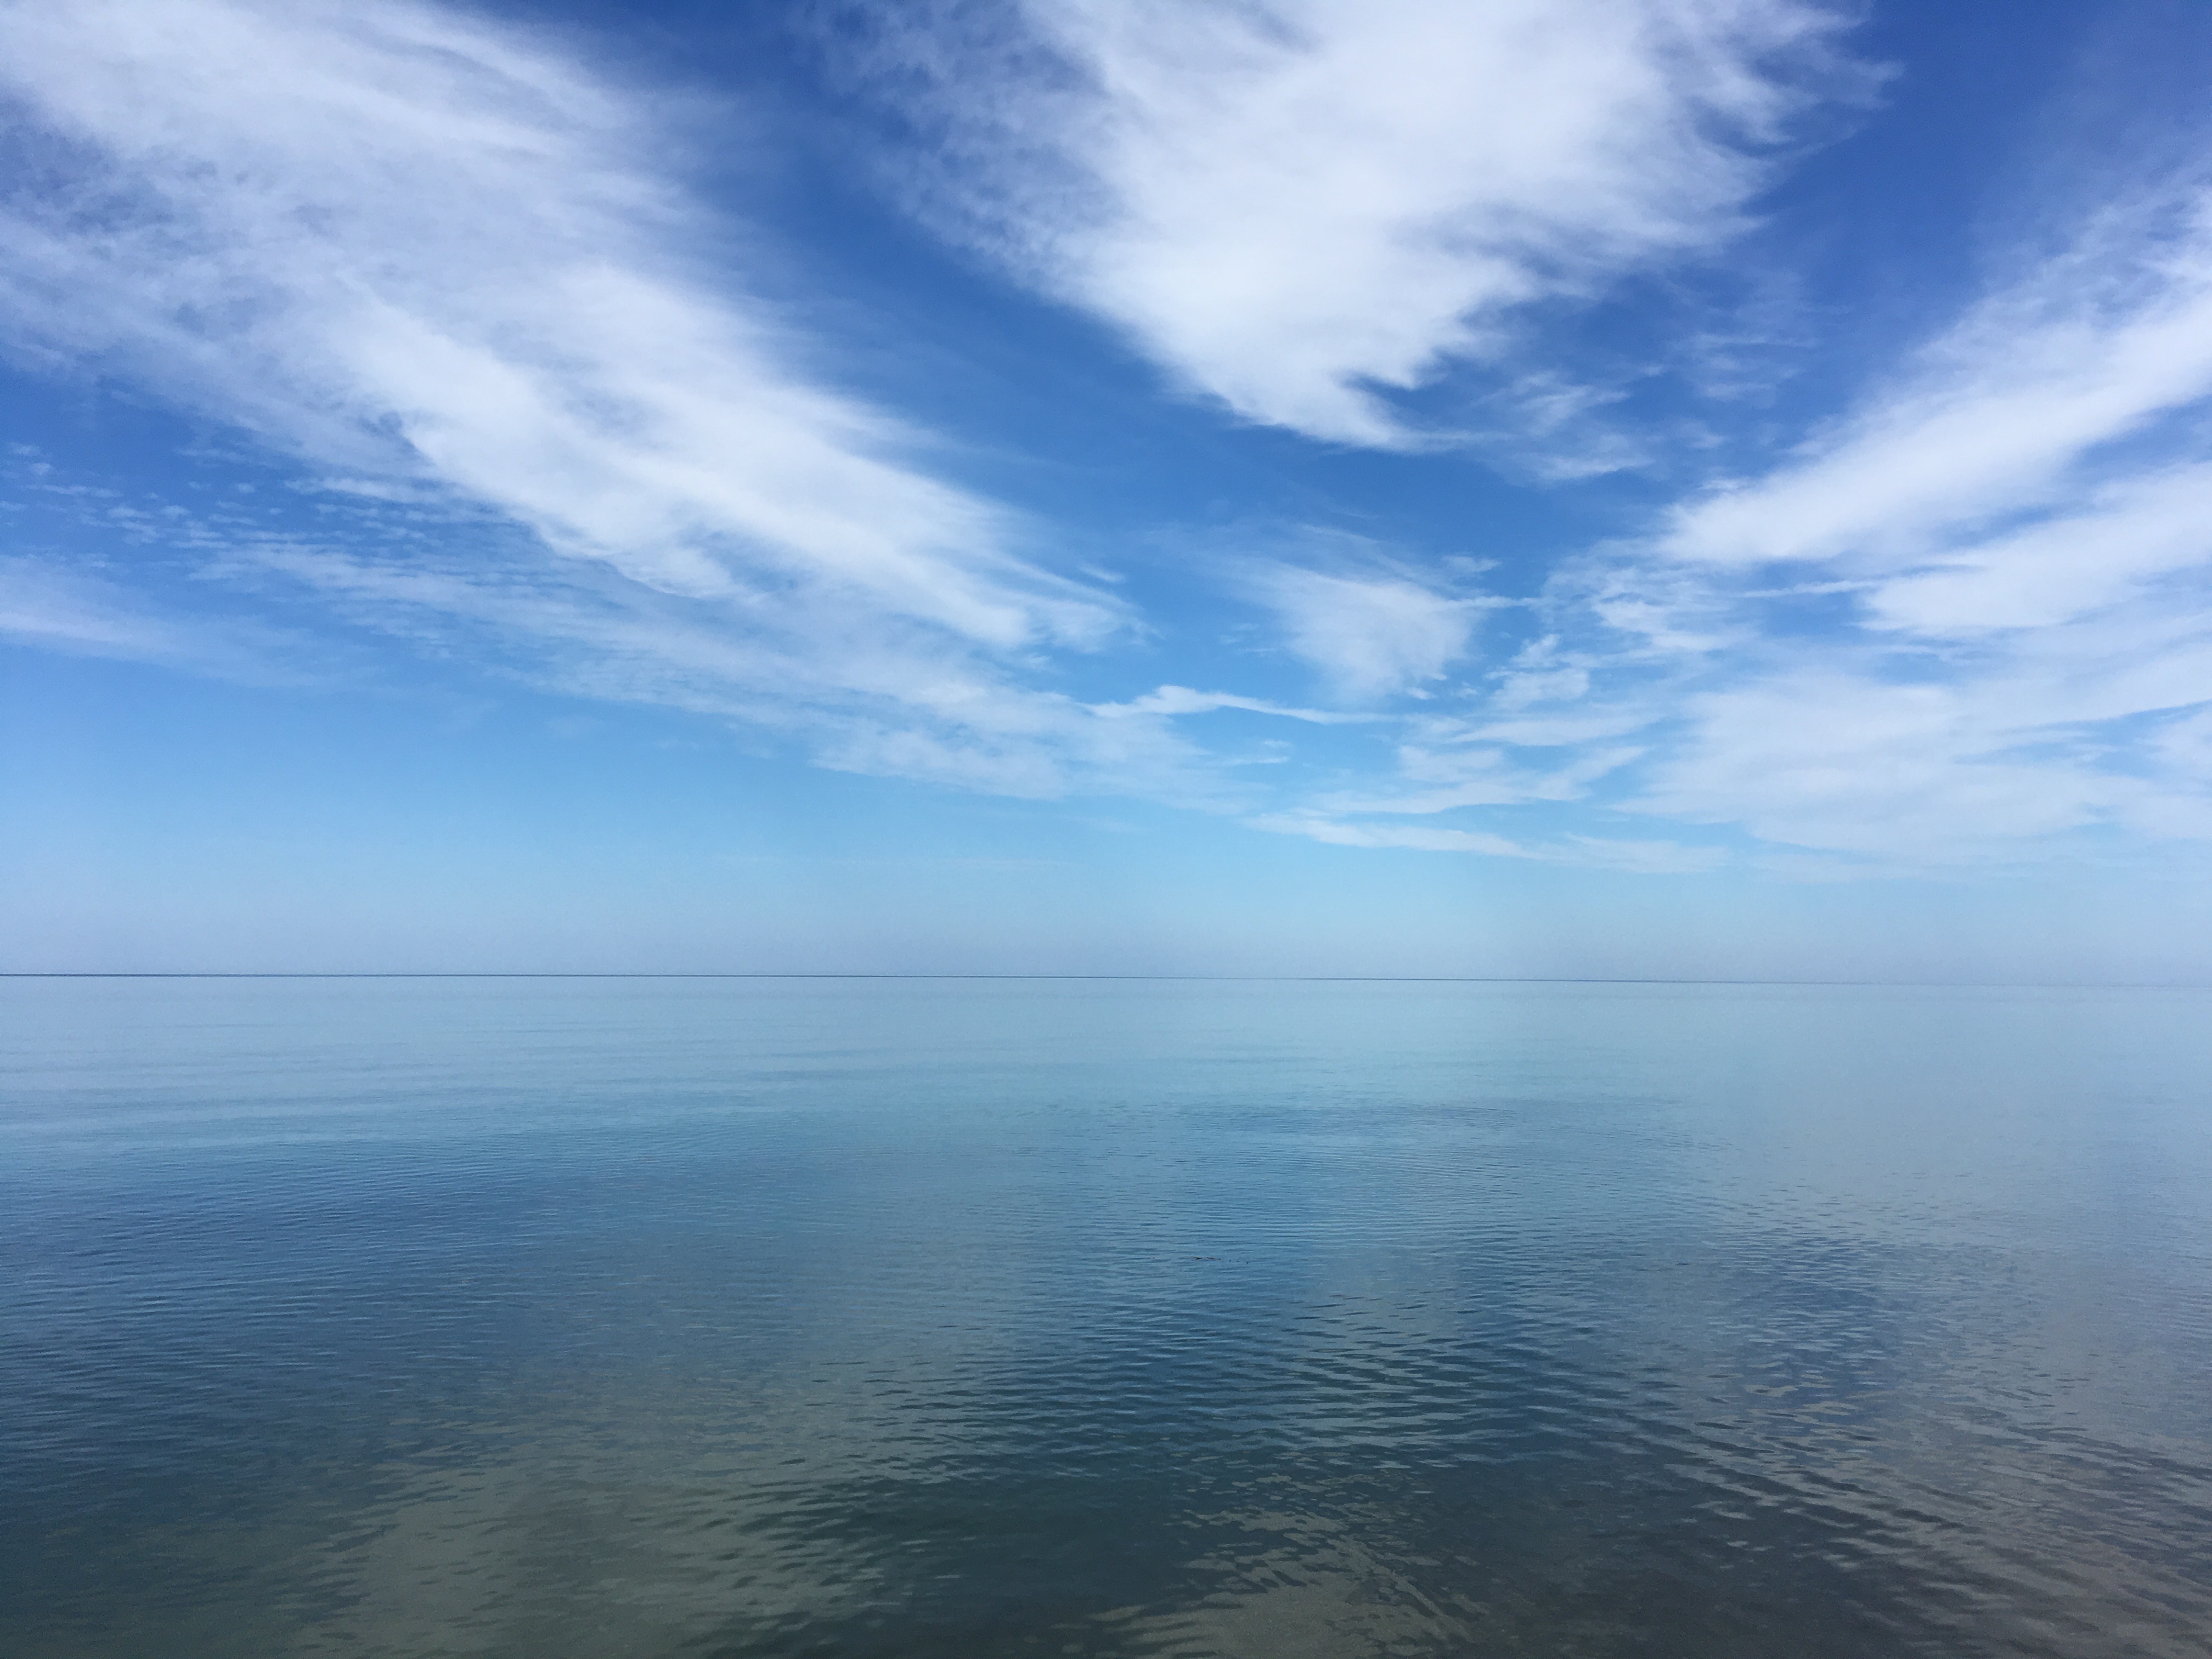 The blue waters of Lake Michigan on a calm day with partly cloudy skies